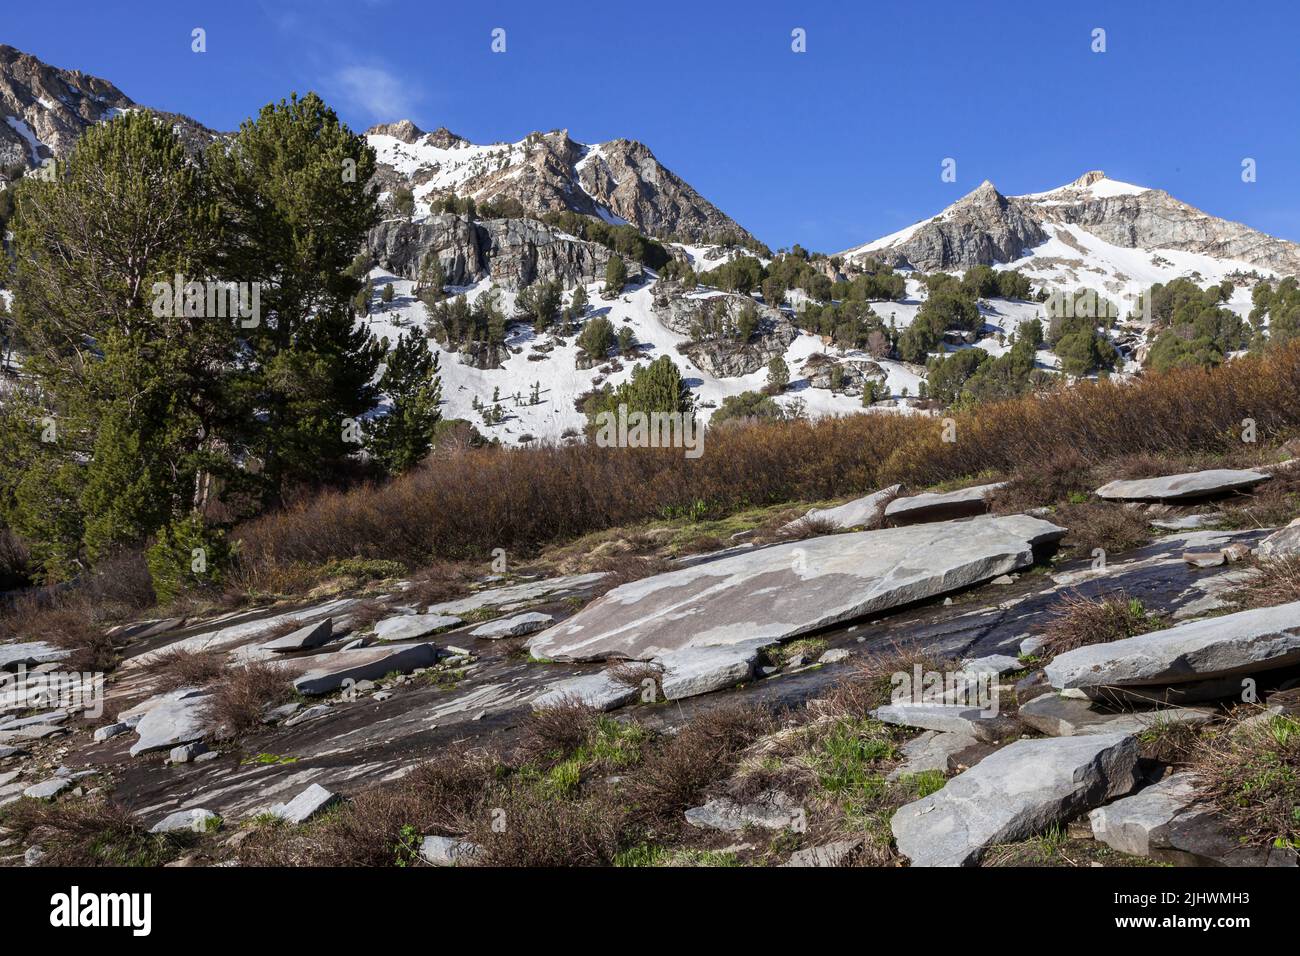 Exfoliating granite at Lamoille Canyon in Nevada's Ruby Mountains Stock Photo